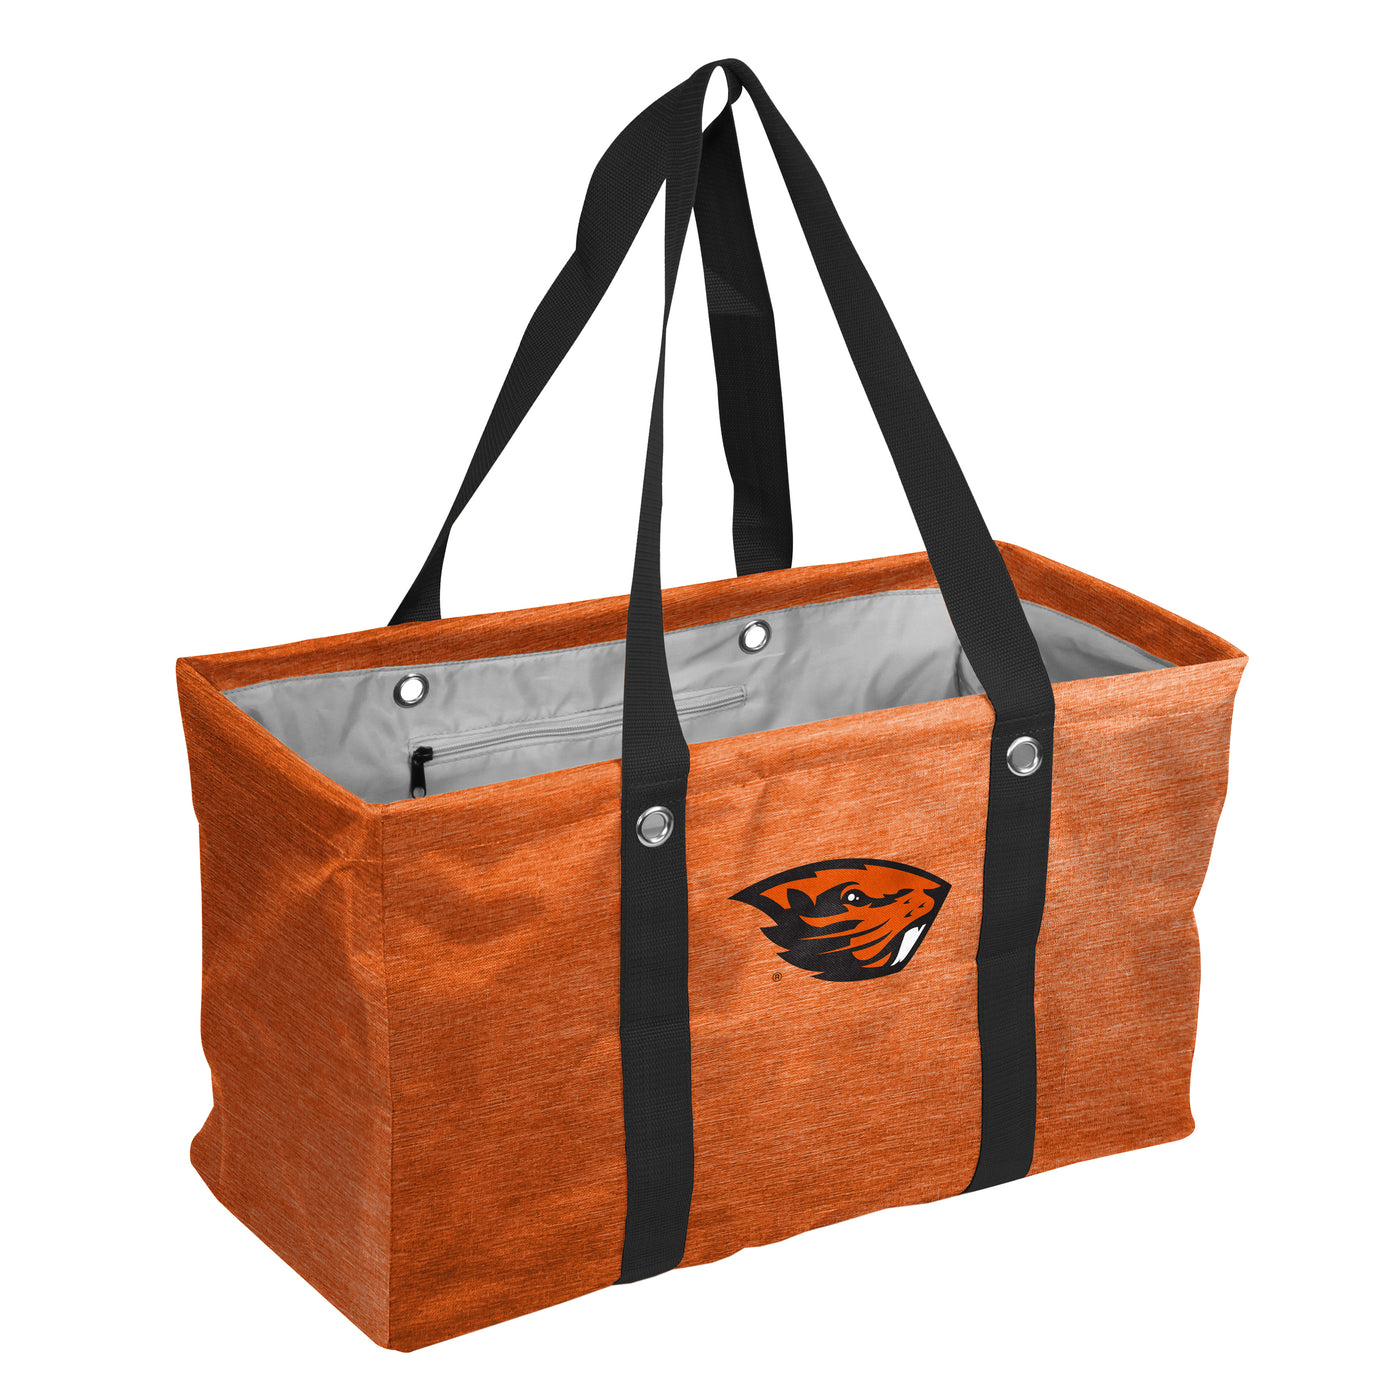 OR State Crosshatch Picnic Caddy